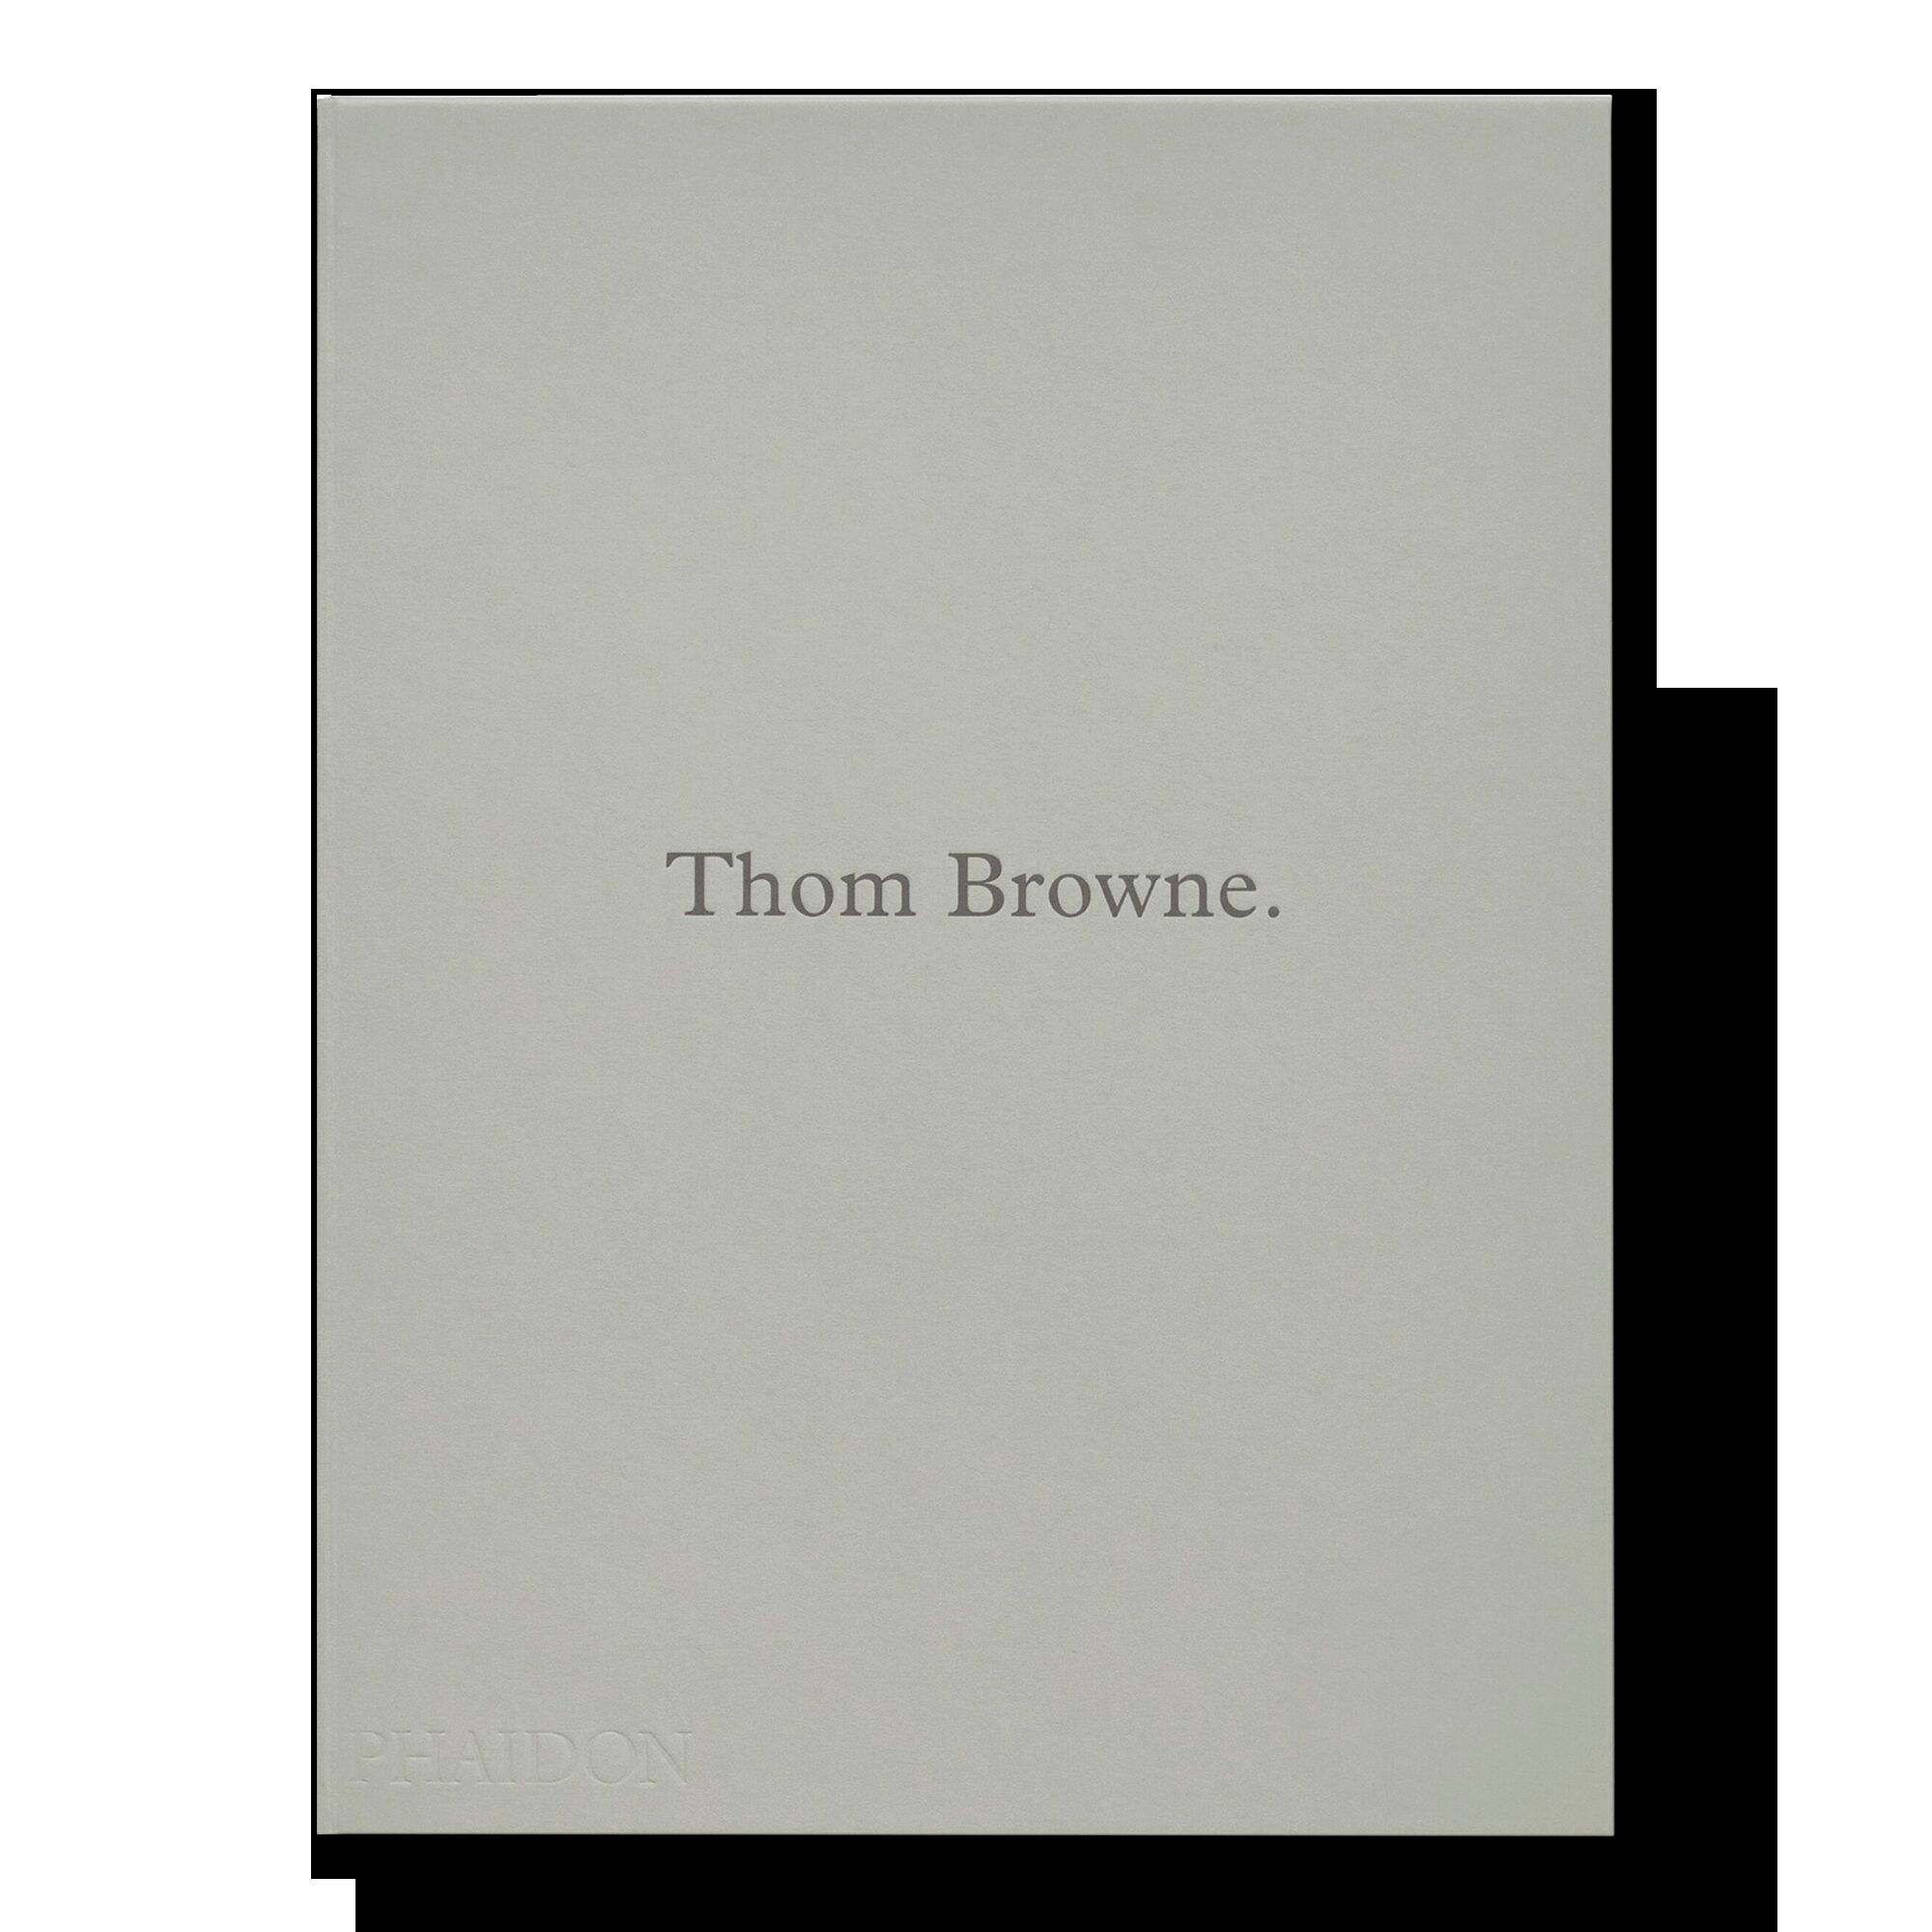 Thom Browne (Signed Edition)